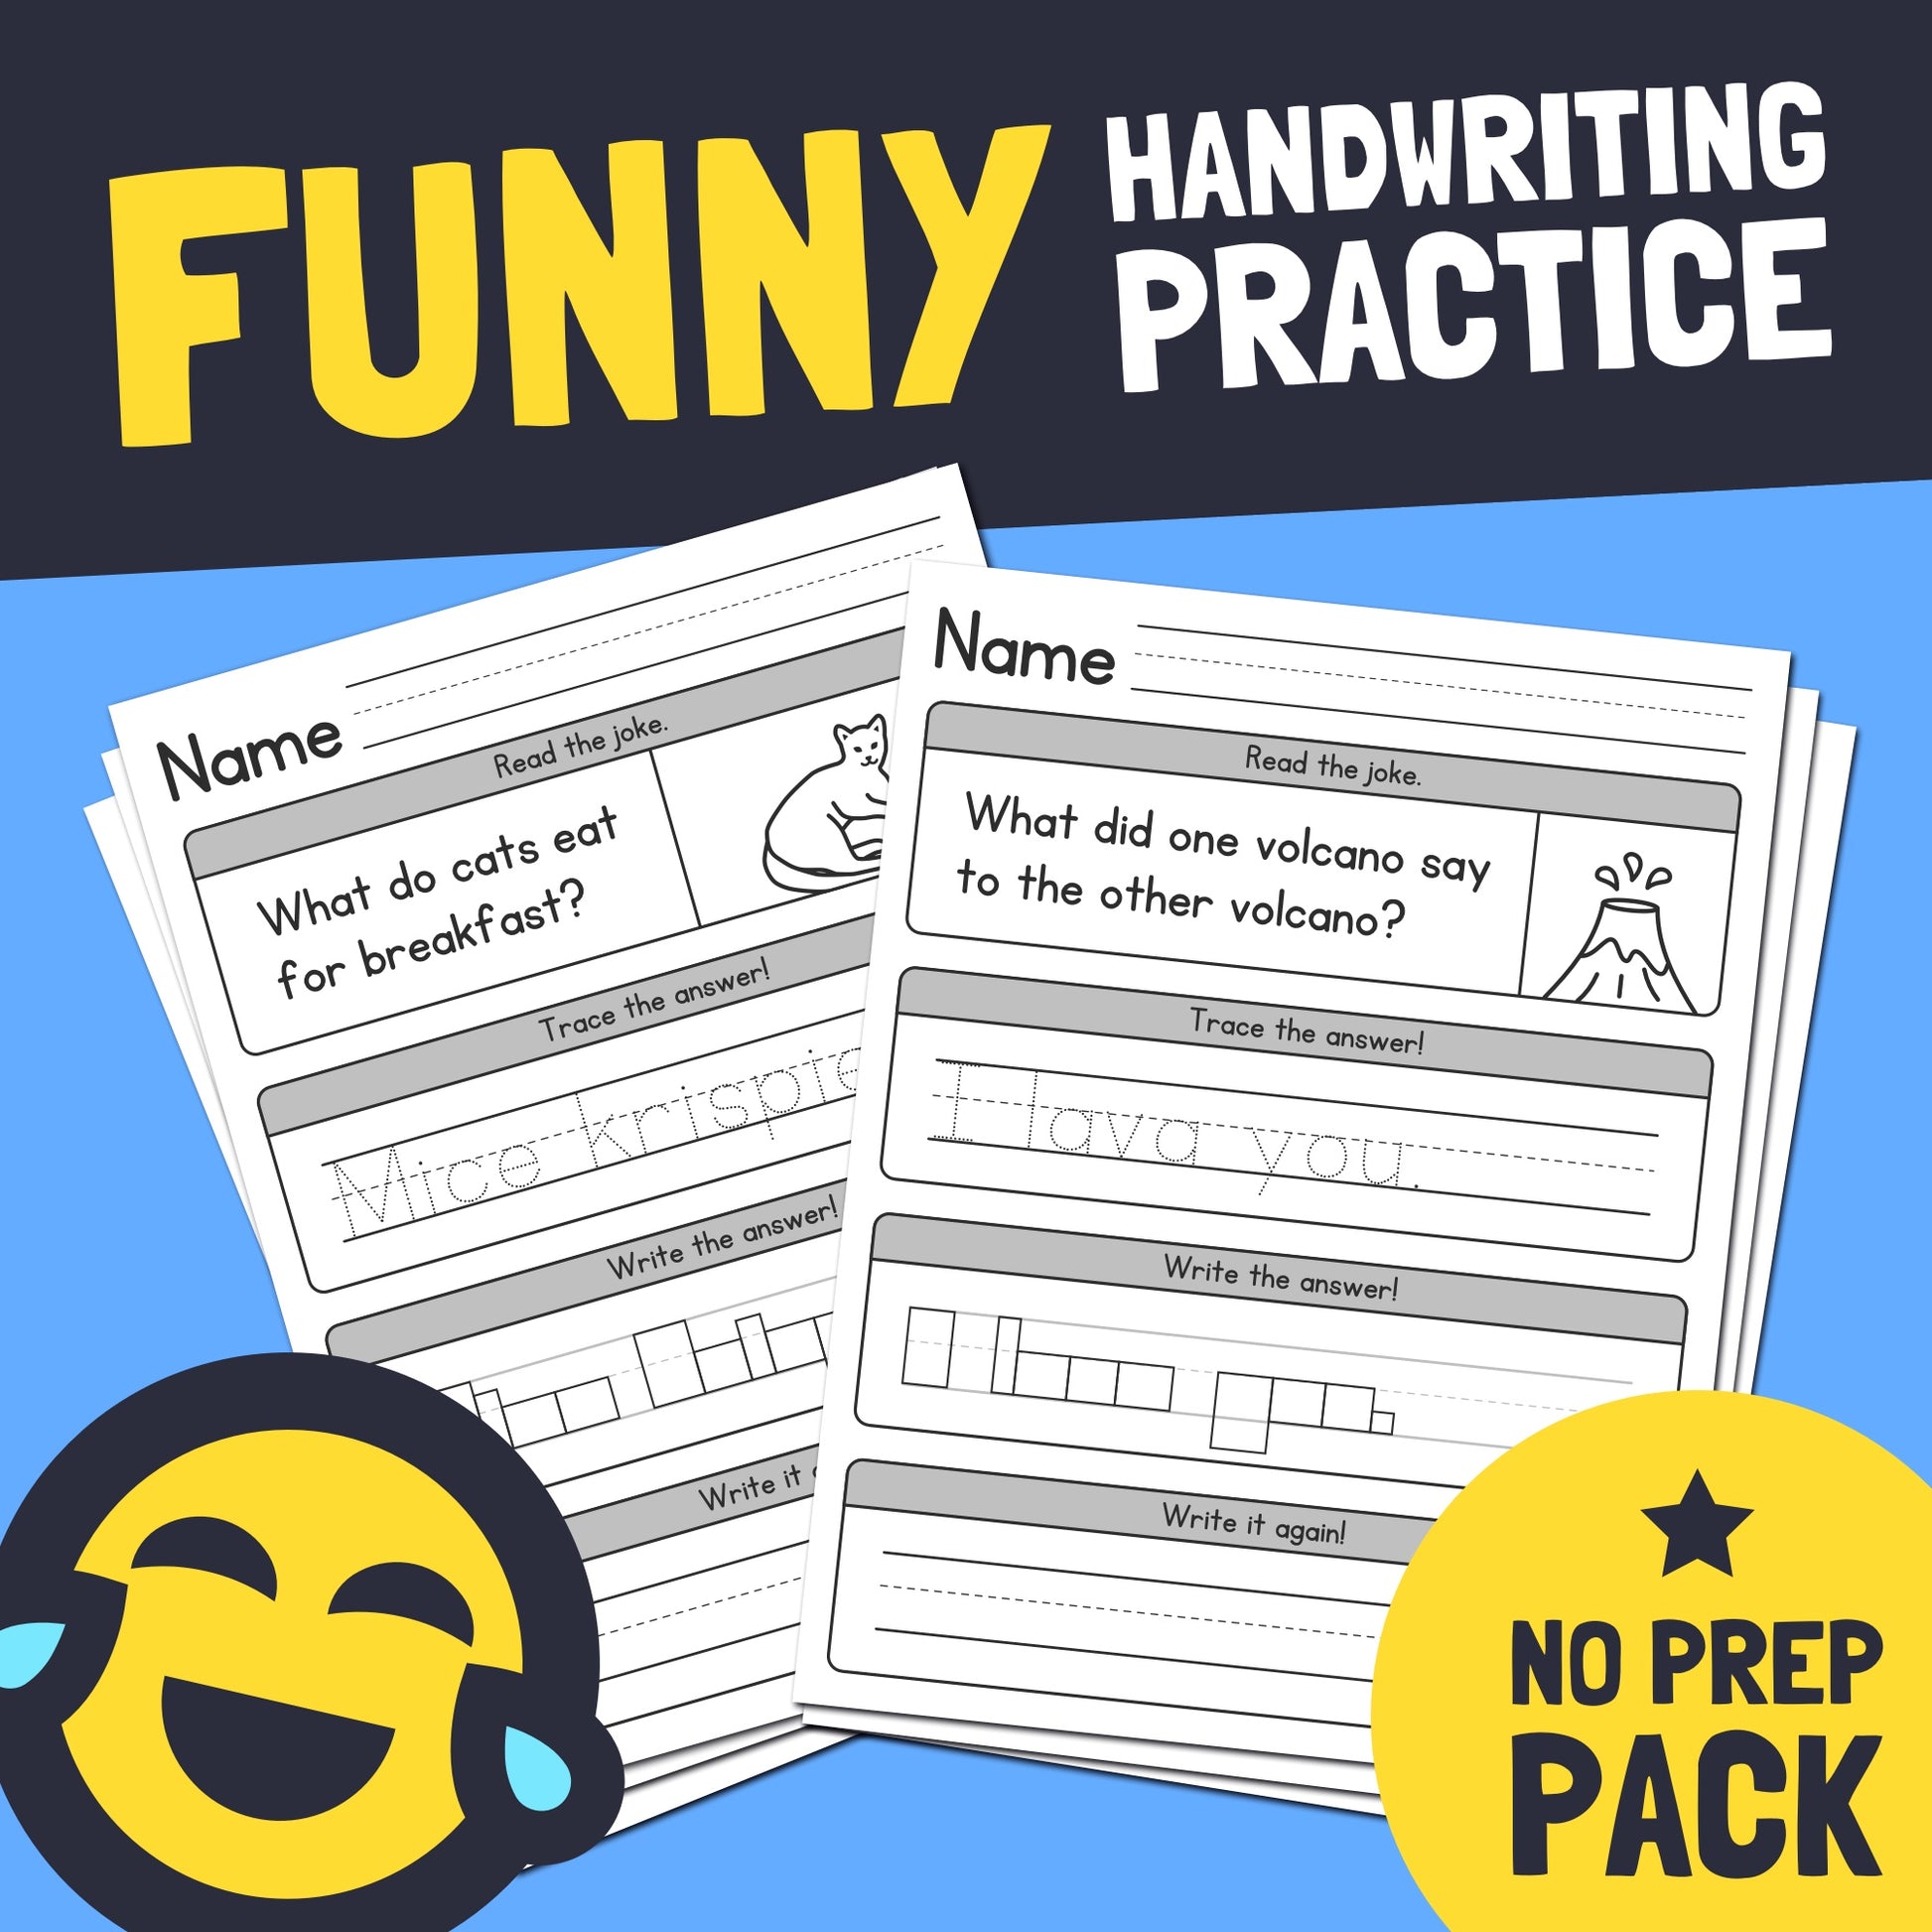 Funny handwriting practice sheets